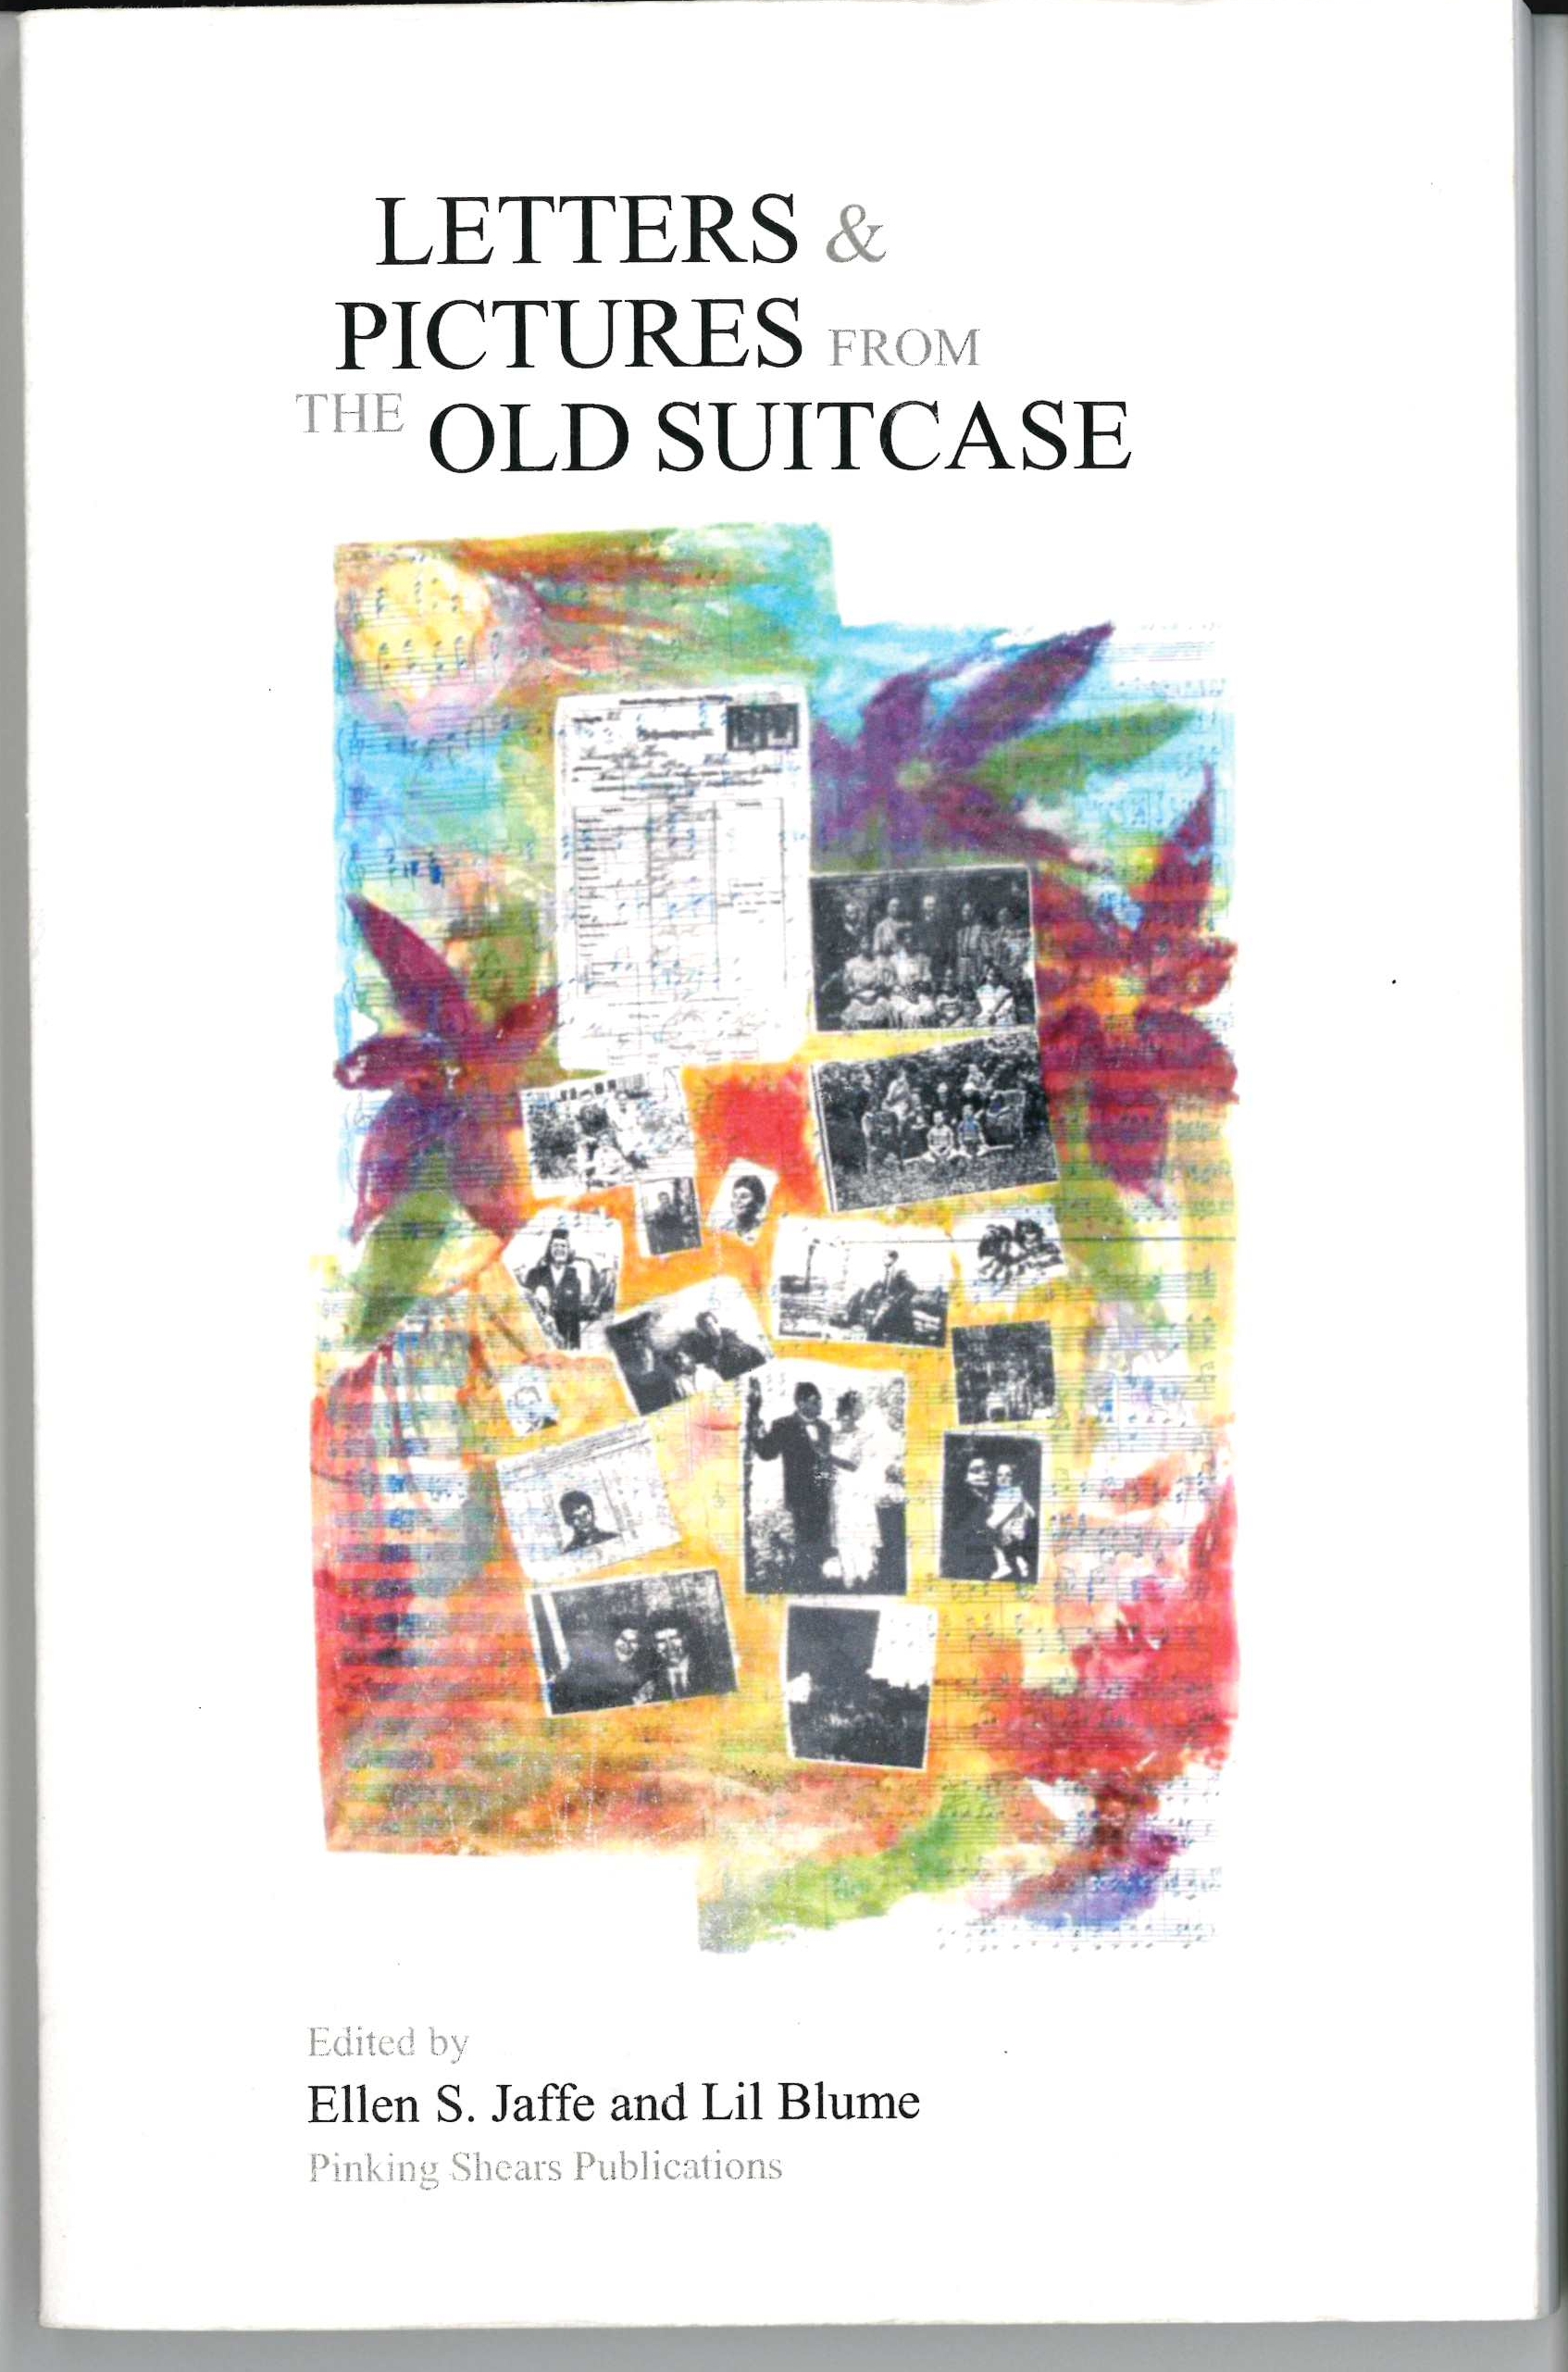 Letters & Pictures from the Old Suitcase